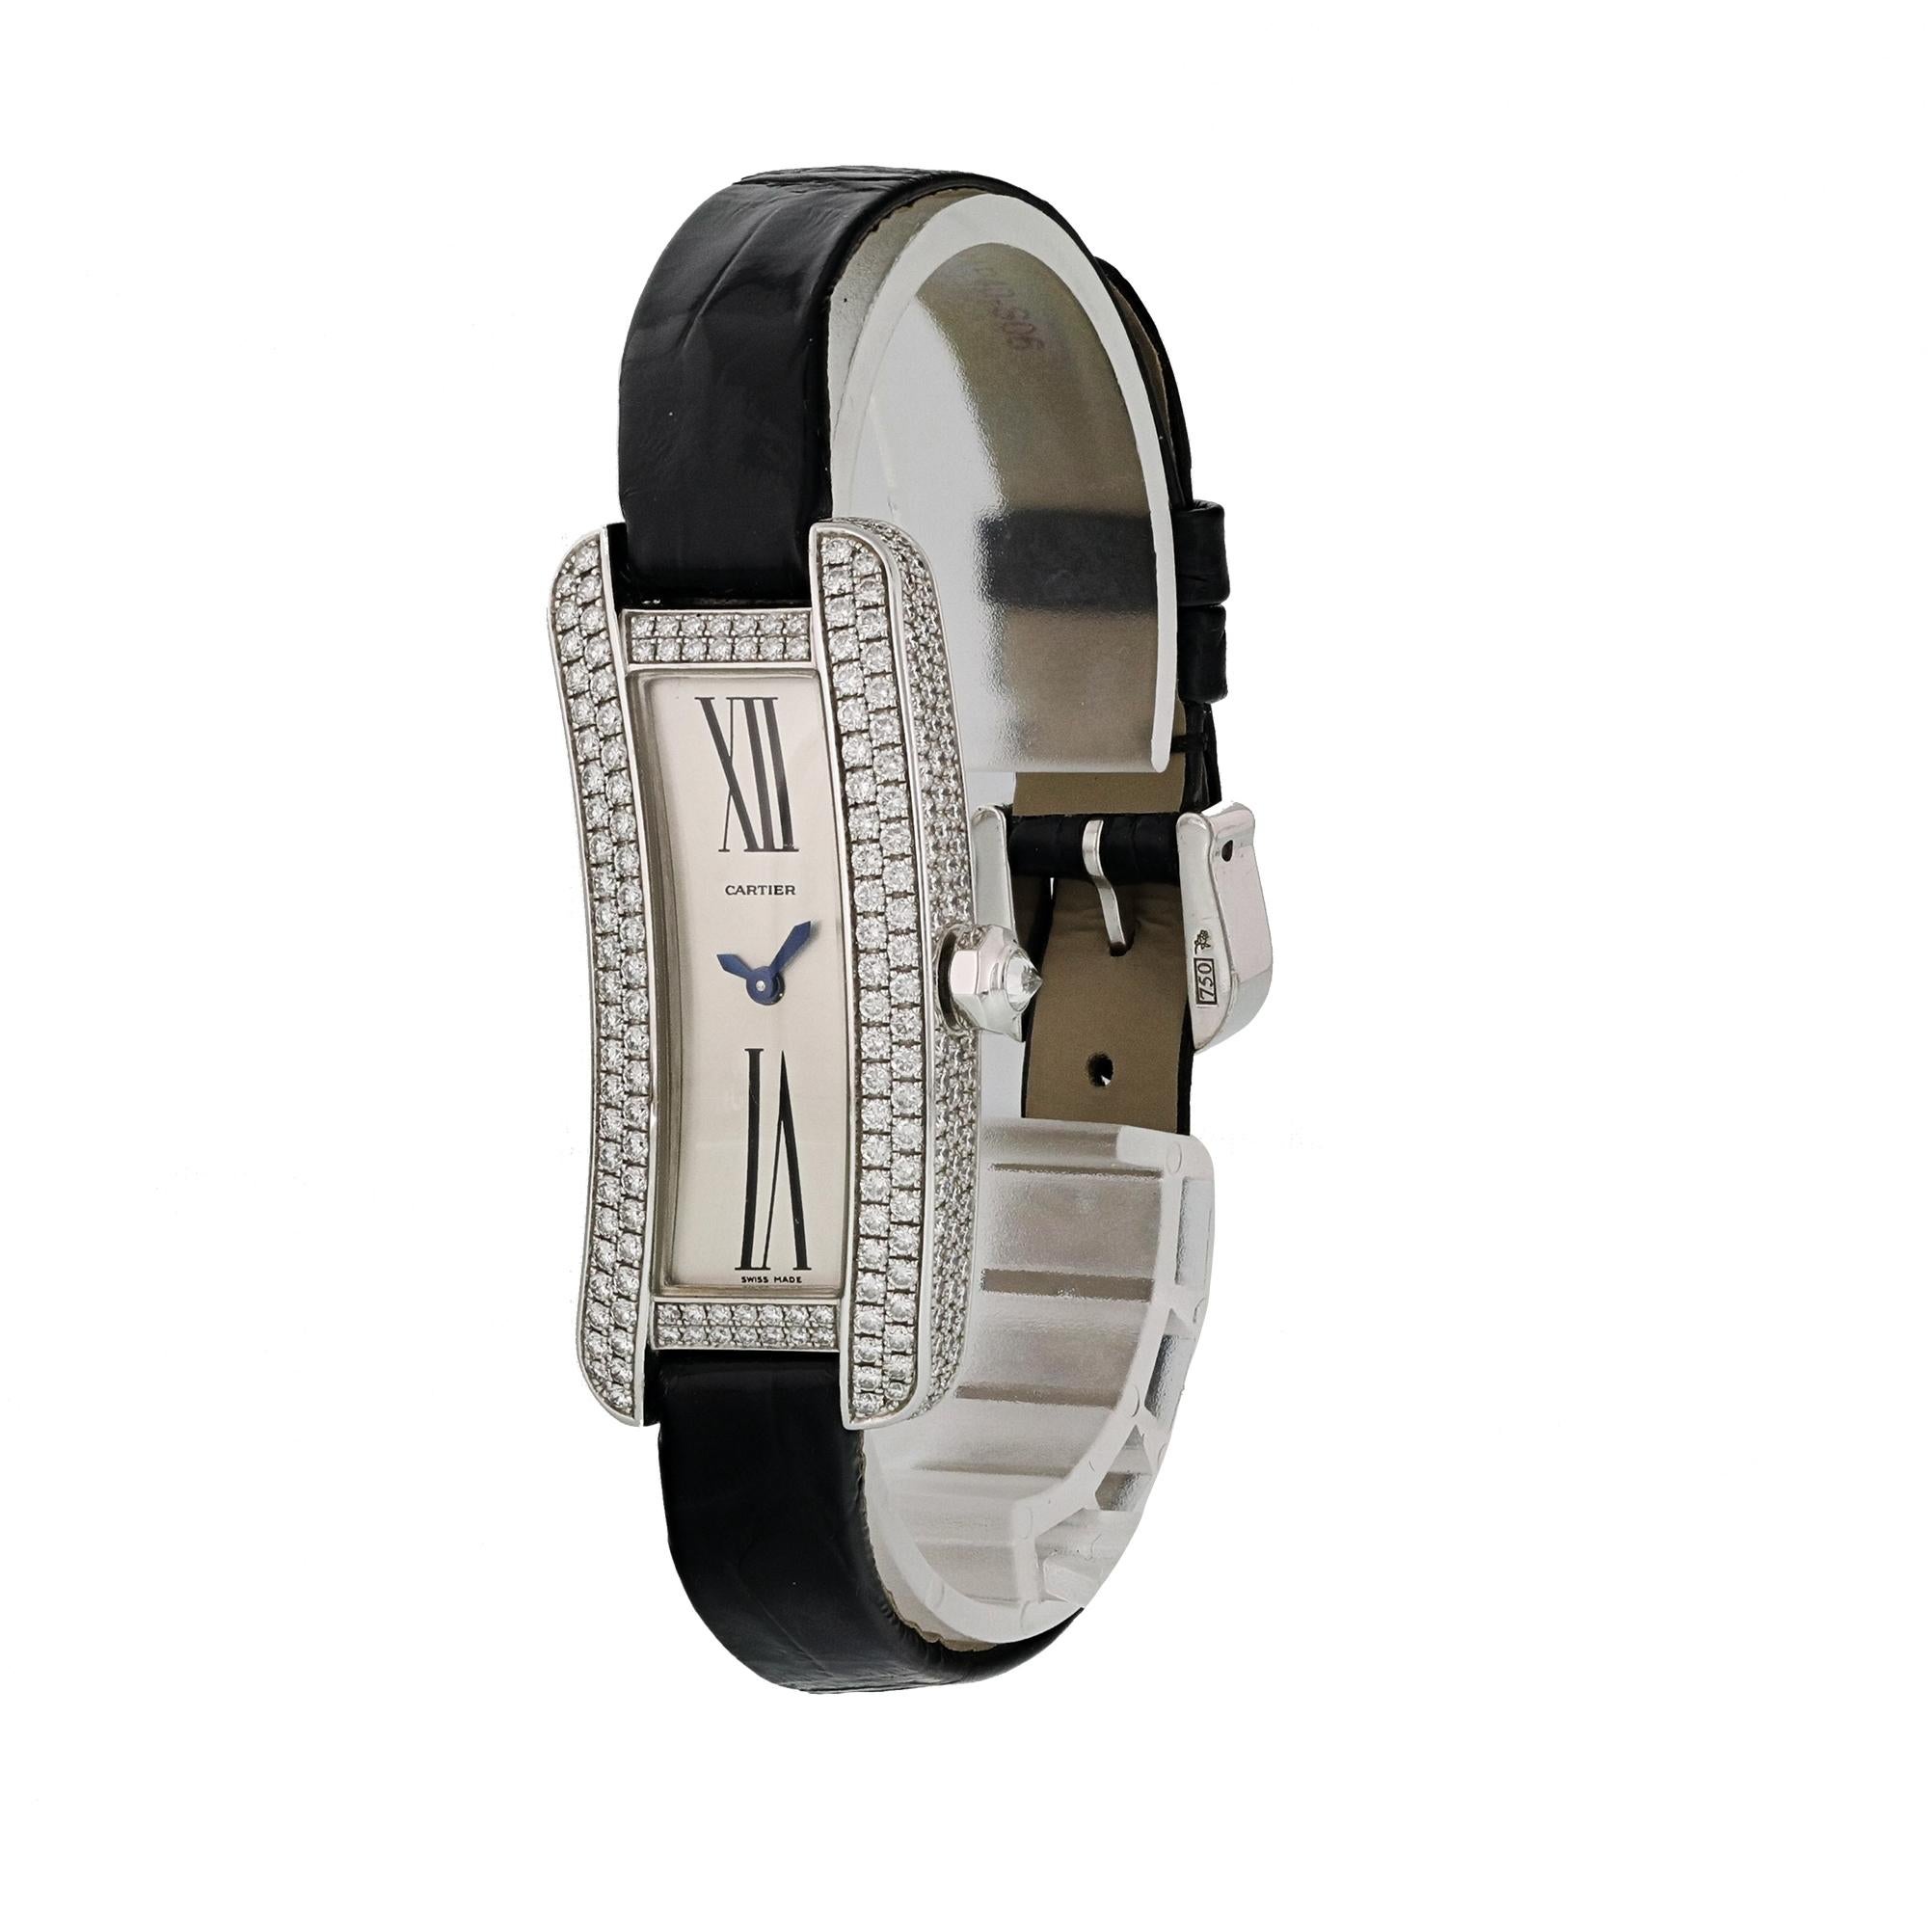 Cartier Tank S Americaine 2625 White Gold Diamond Ladies Watch.
16mm 18K White Gold case with handset Diamonds. 
White Gold Stationary bezel handset with diamonds.
Silver dial with blue steel hands and Roman numeral hour markers. 
Leather Strap with